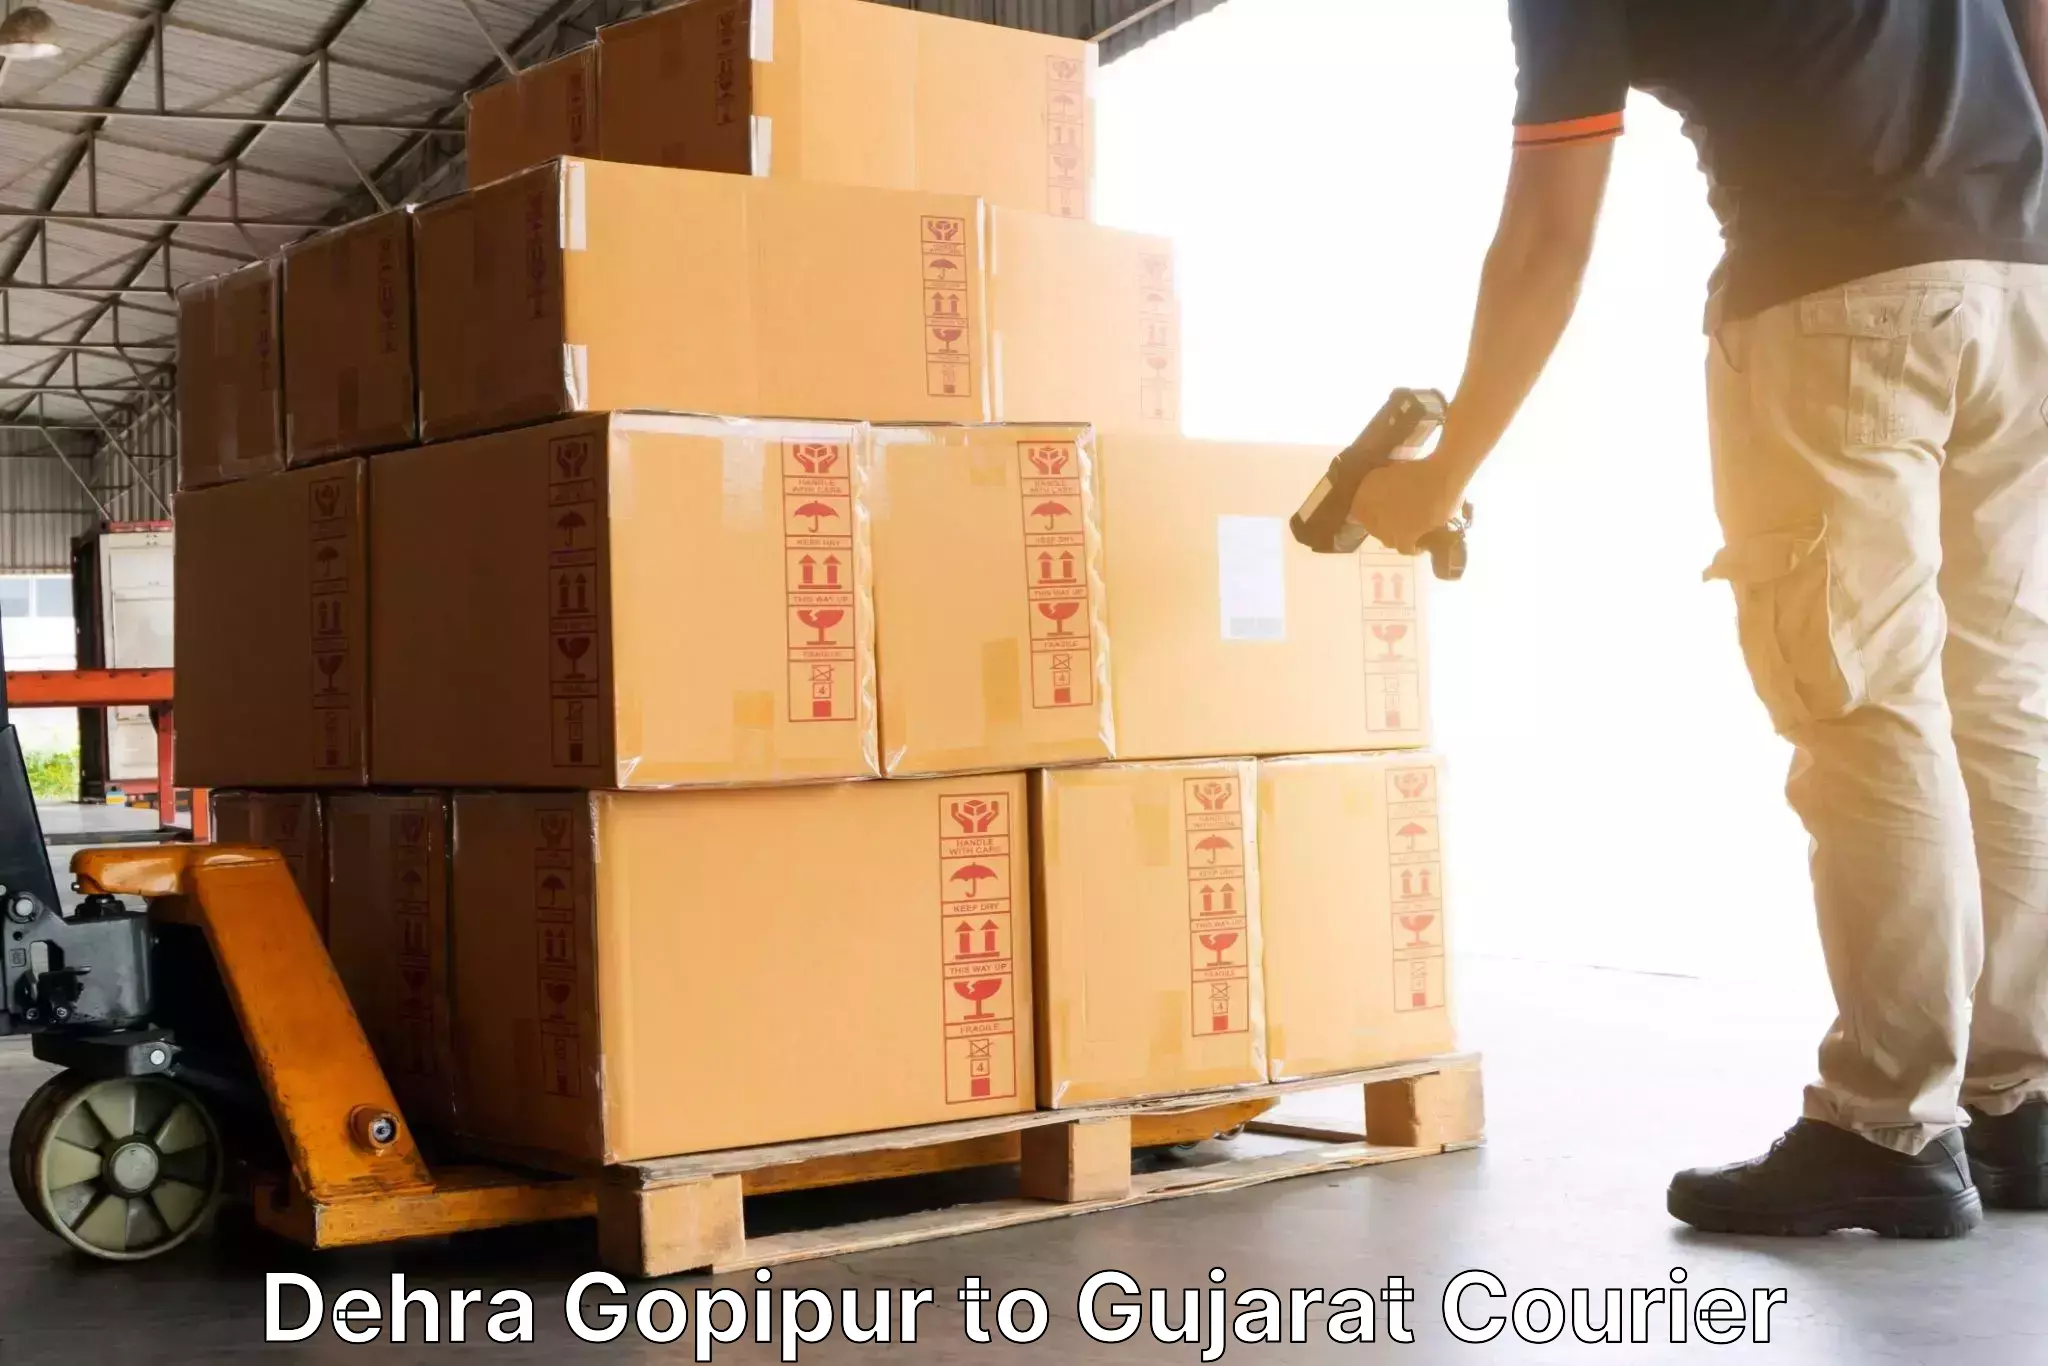 Courier tracking online Dehra Gopipur to Ahmedabad